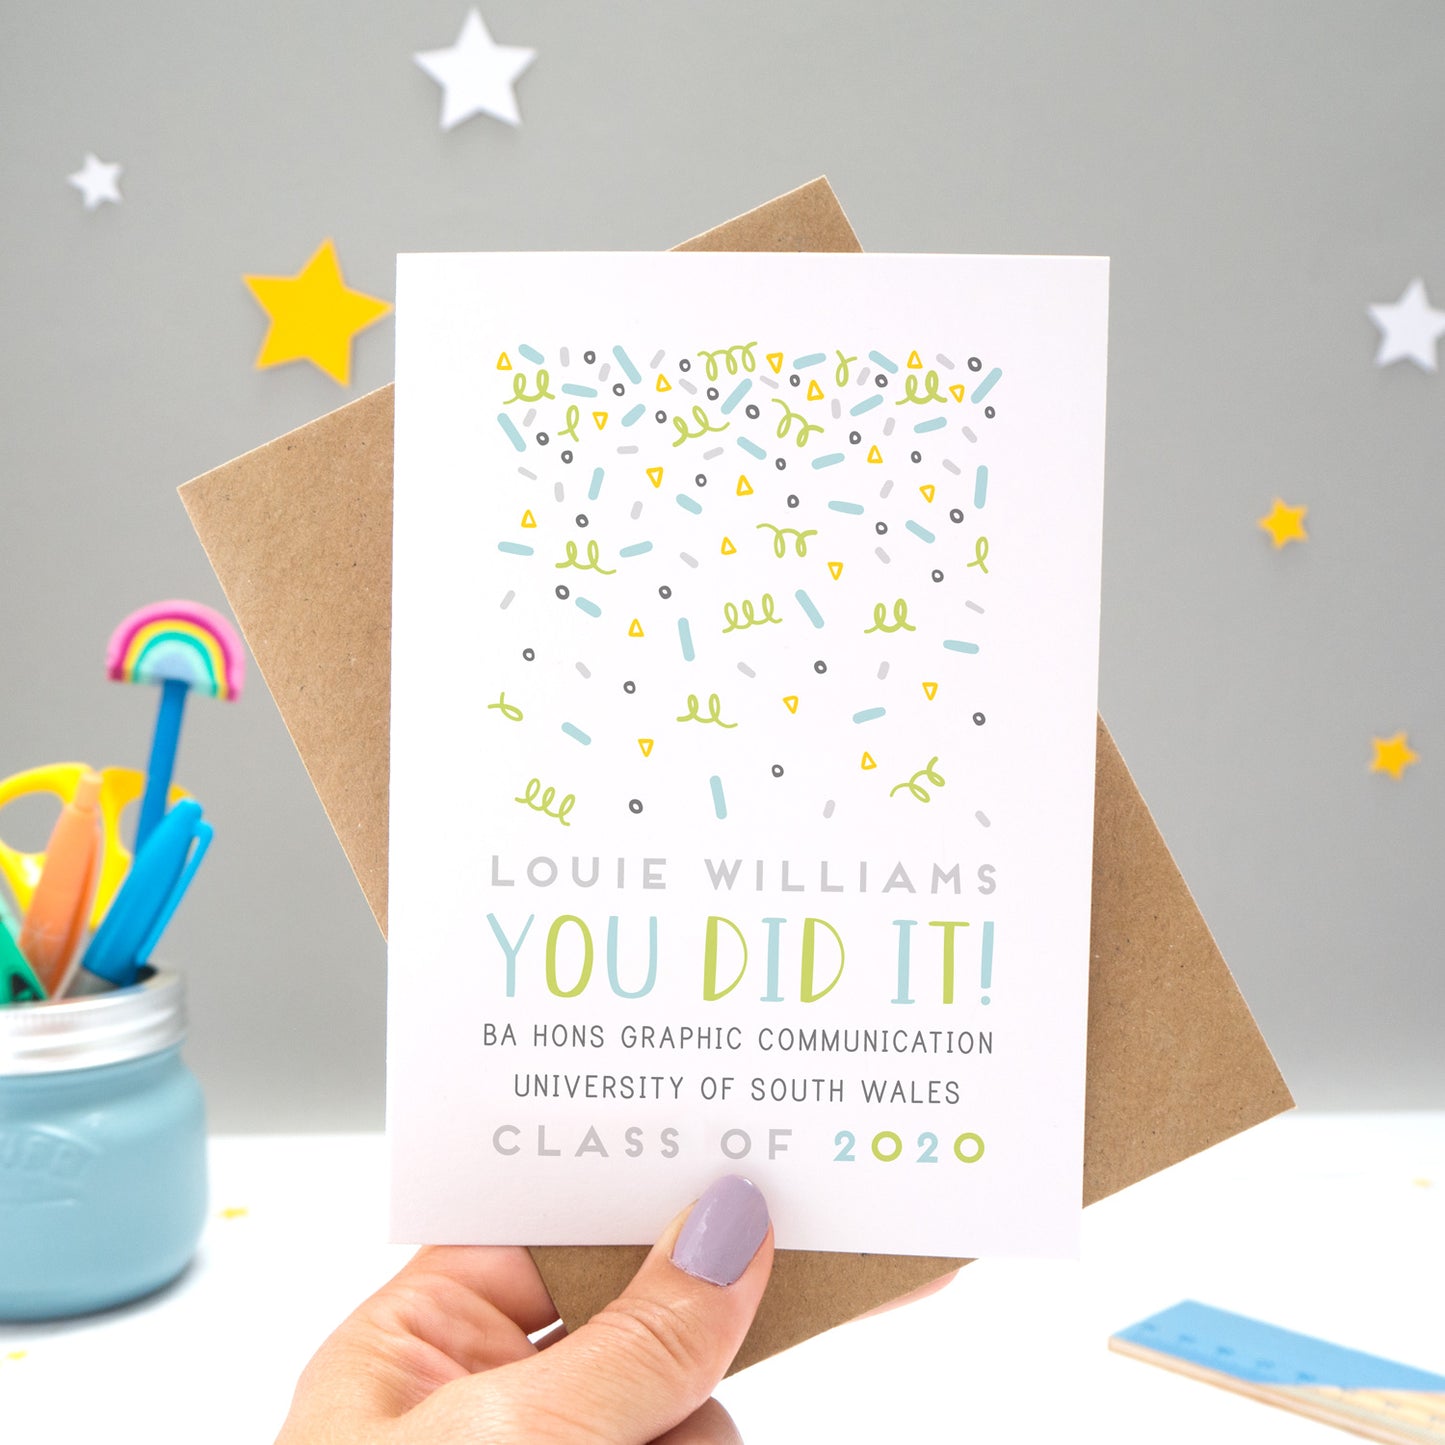 A personalised graduation card designed and made by Joanne Hawker in her somerset studio being held against a kraft brown envelope over a grey background with yellow and white stars. The confetti illustration and text is in varying tones of grey, blue and green.